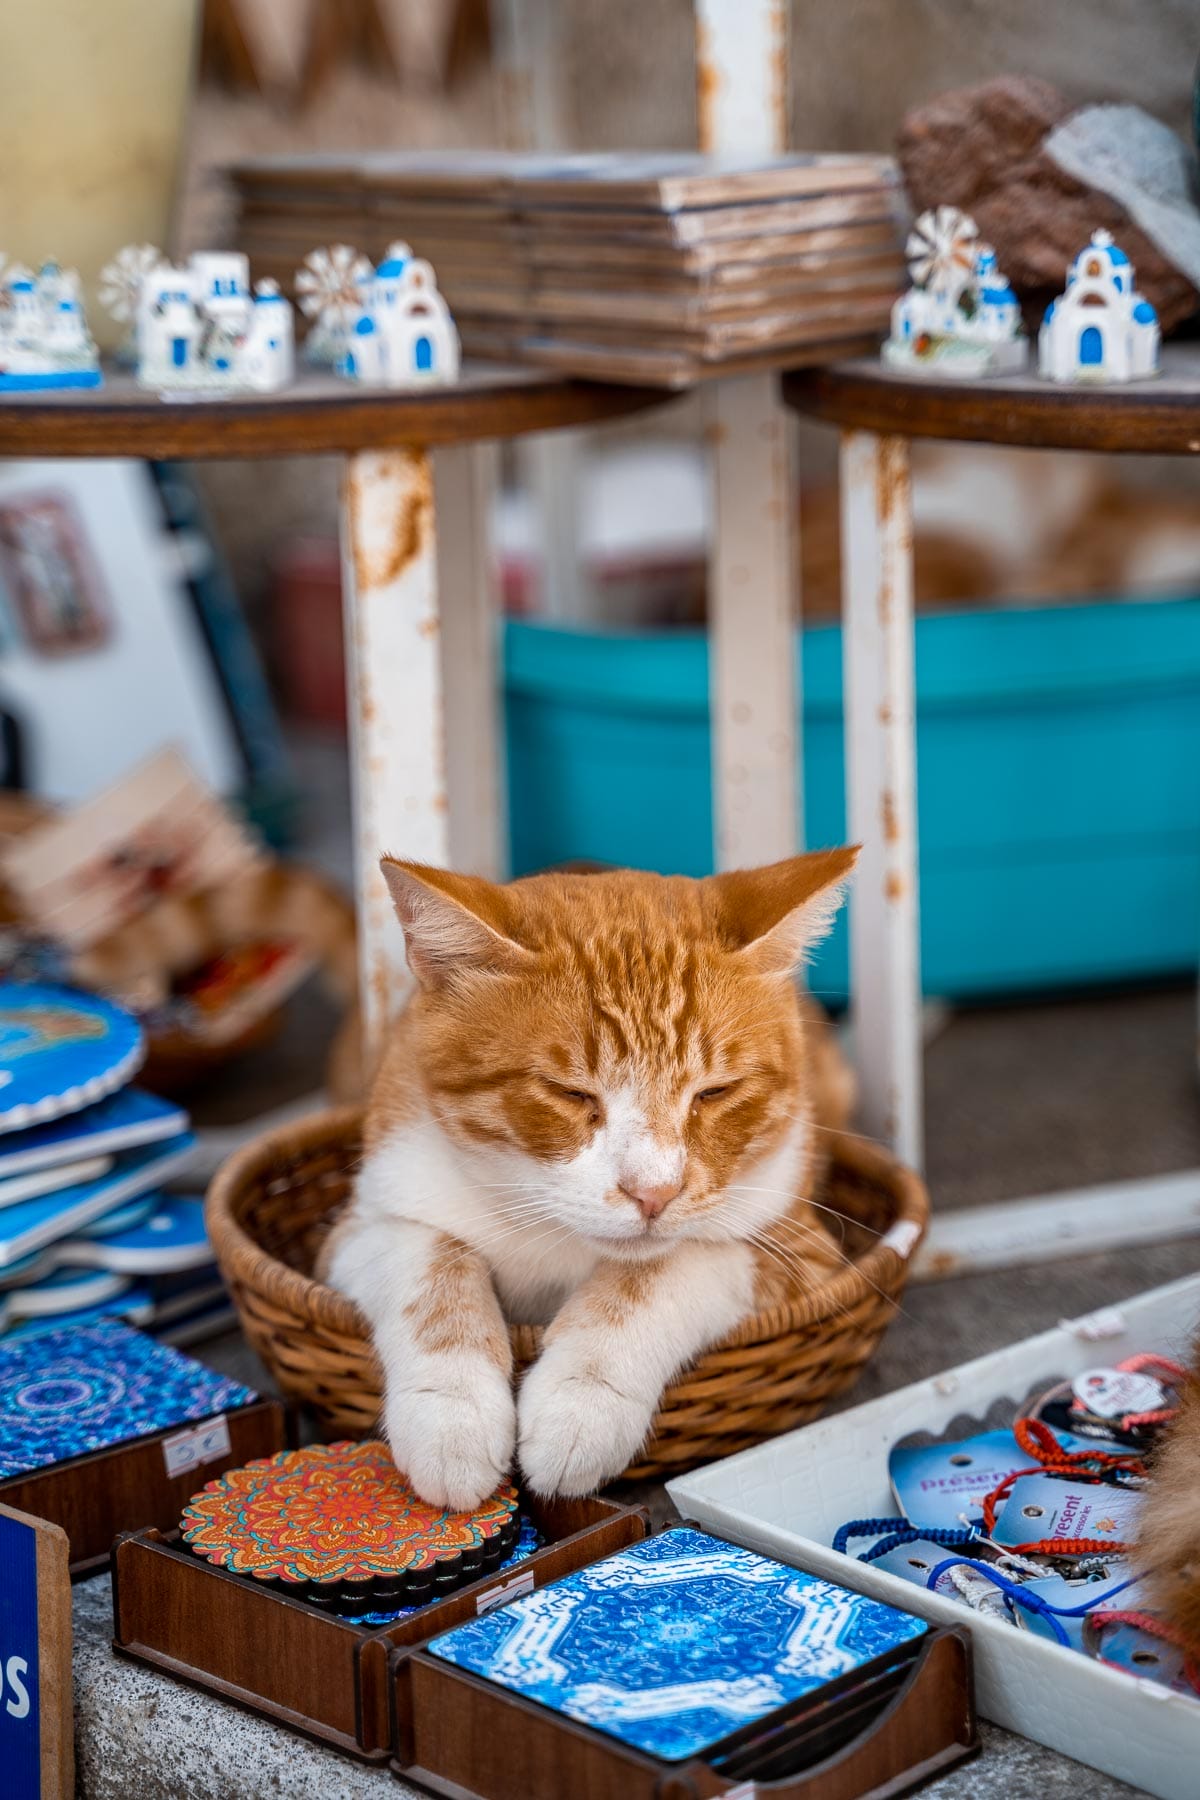 Cat sleeping on top of the souvenirs in Pyrgos, Greece